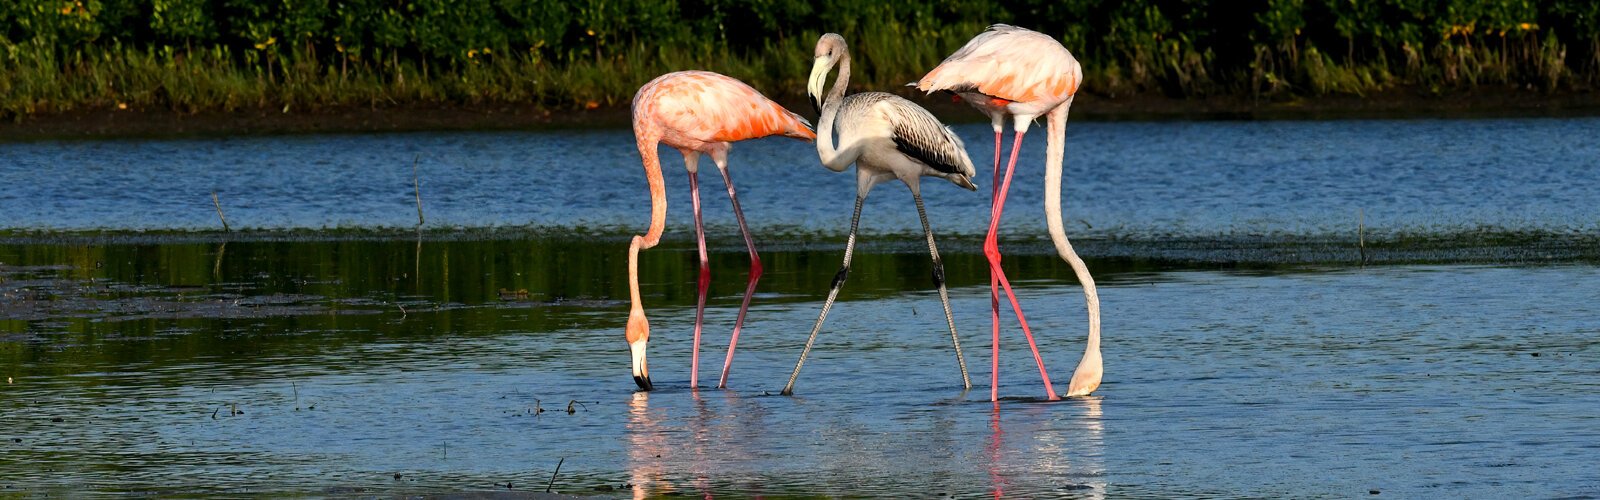 Soon, their youngster joined them. Flamingos raise a single chick during the nesting season and juveniles have grey feathers for their first two years.